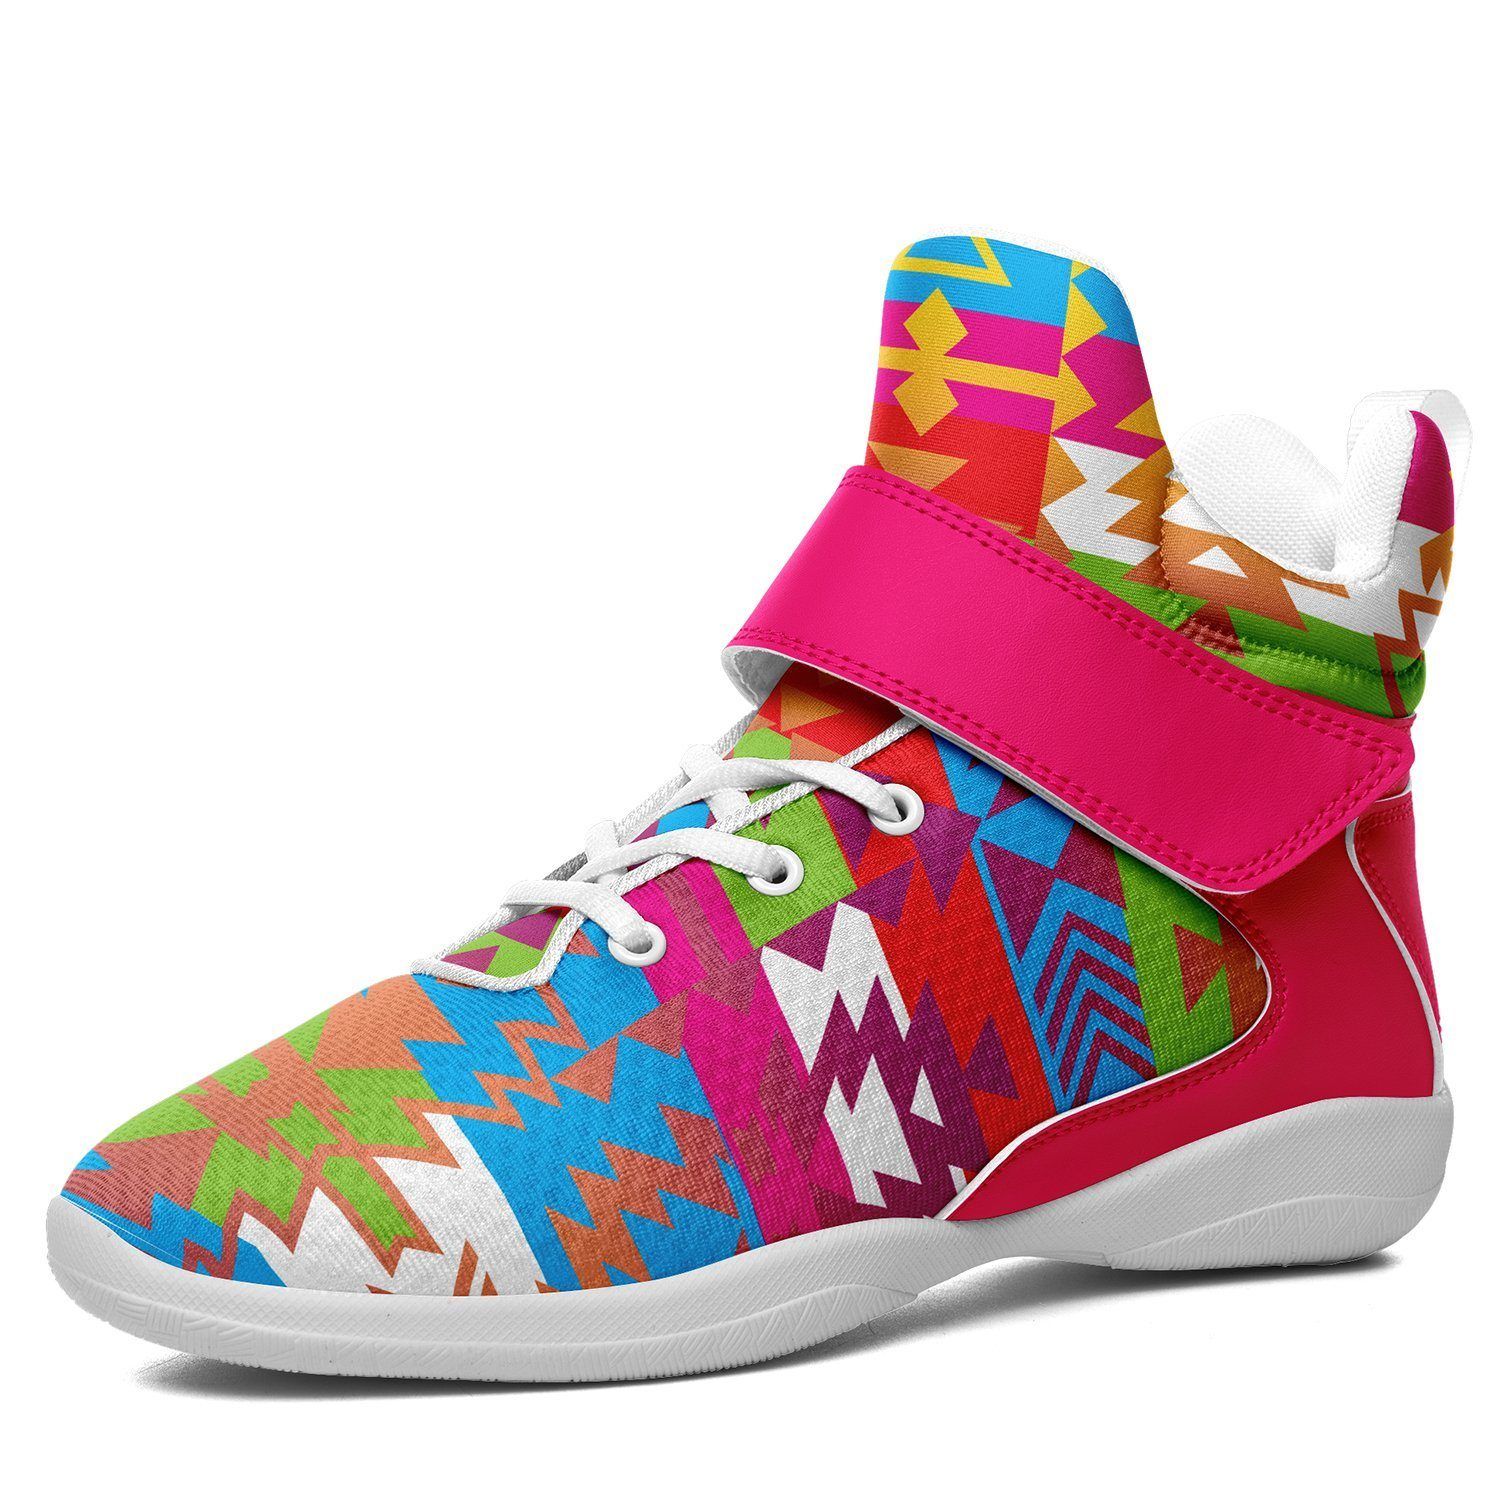 Grand Entry Ipottaa Basketball / Sport High Top Shoes - White Sole 49 Dzine US Men 7 / EUR 40 White Sole with Pink Strap 